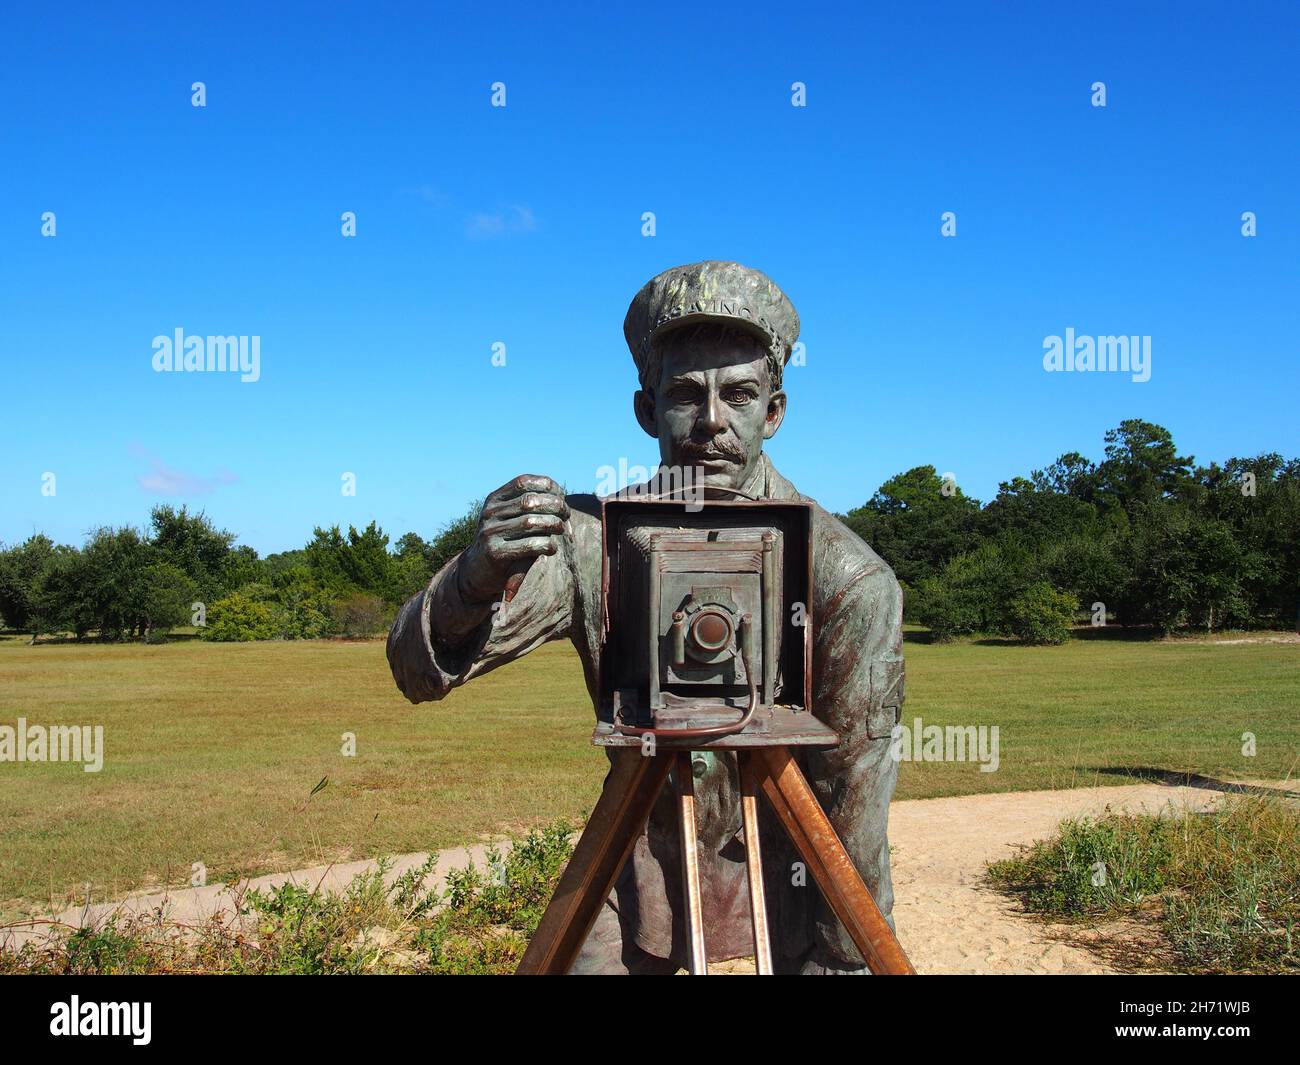 Close-up of photographer John T. Daniels on the December 17, 1903 bronze sculpture by Stephen H. Smith at the Wright Brothers National Memorial in Kil Stock Photo